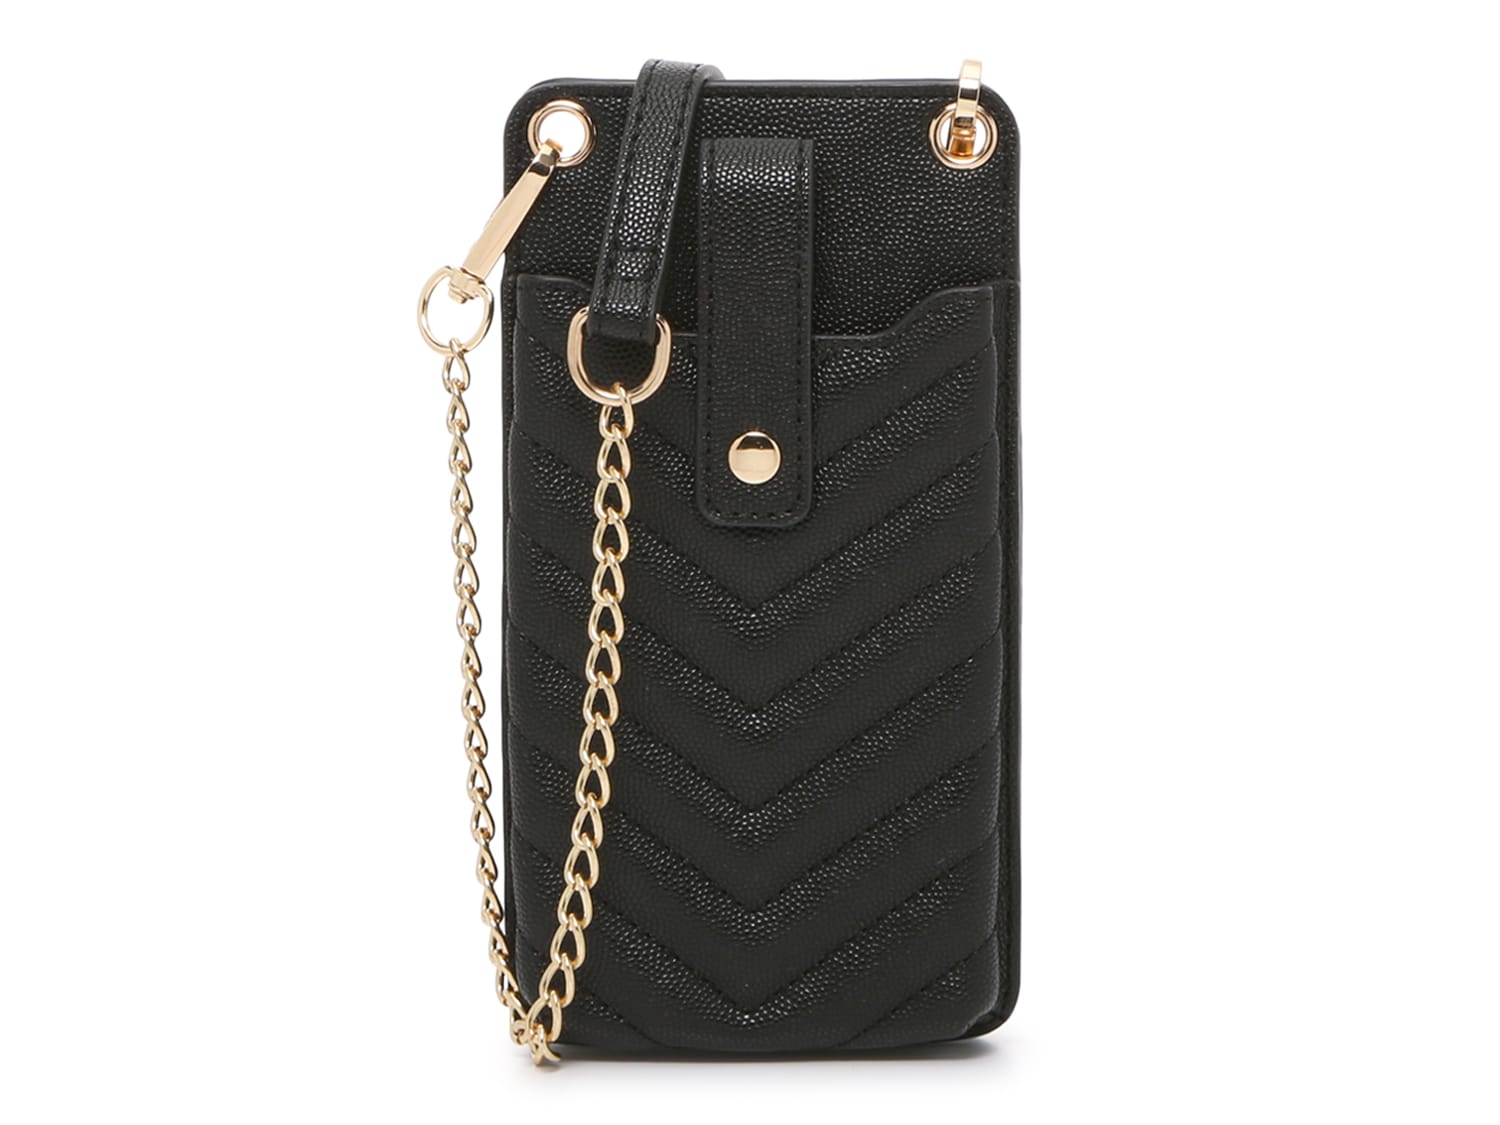 Kelly & Katie Claire Cell Phone Crossbody